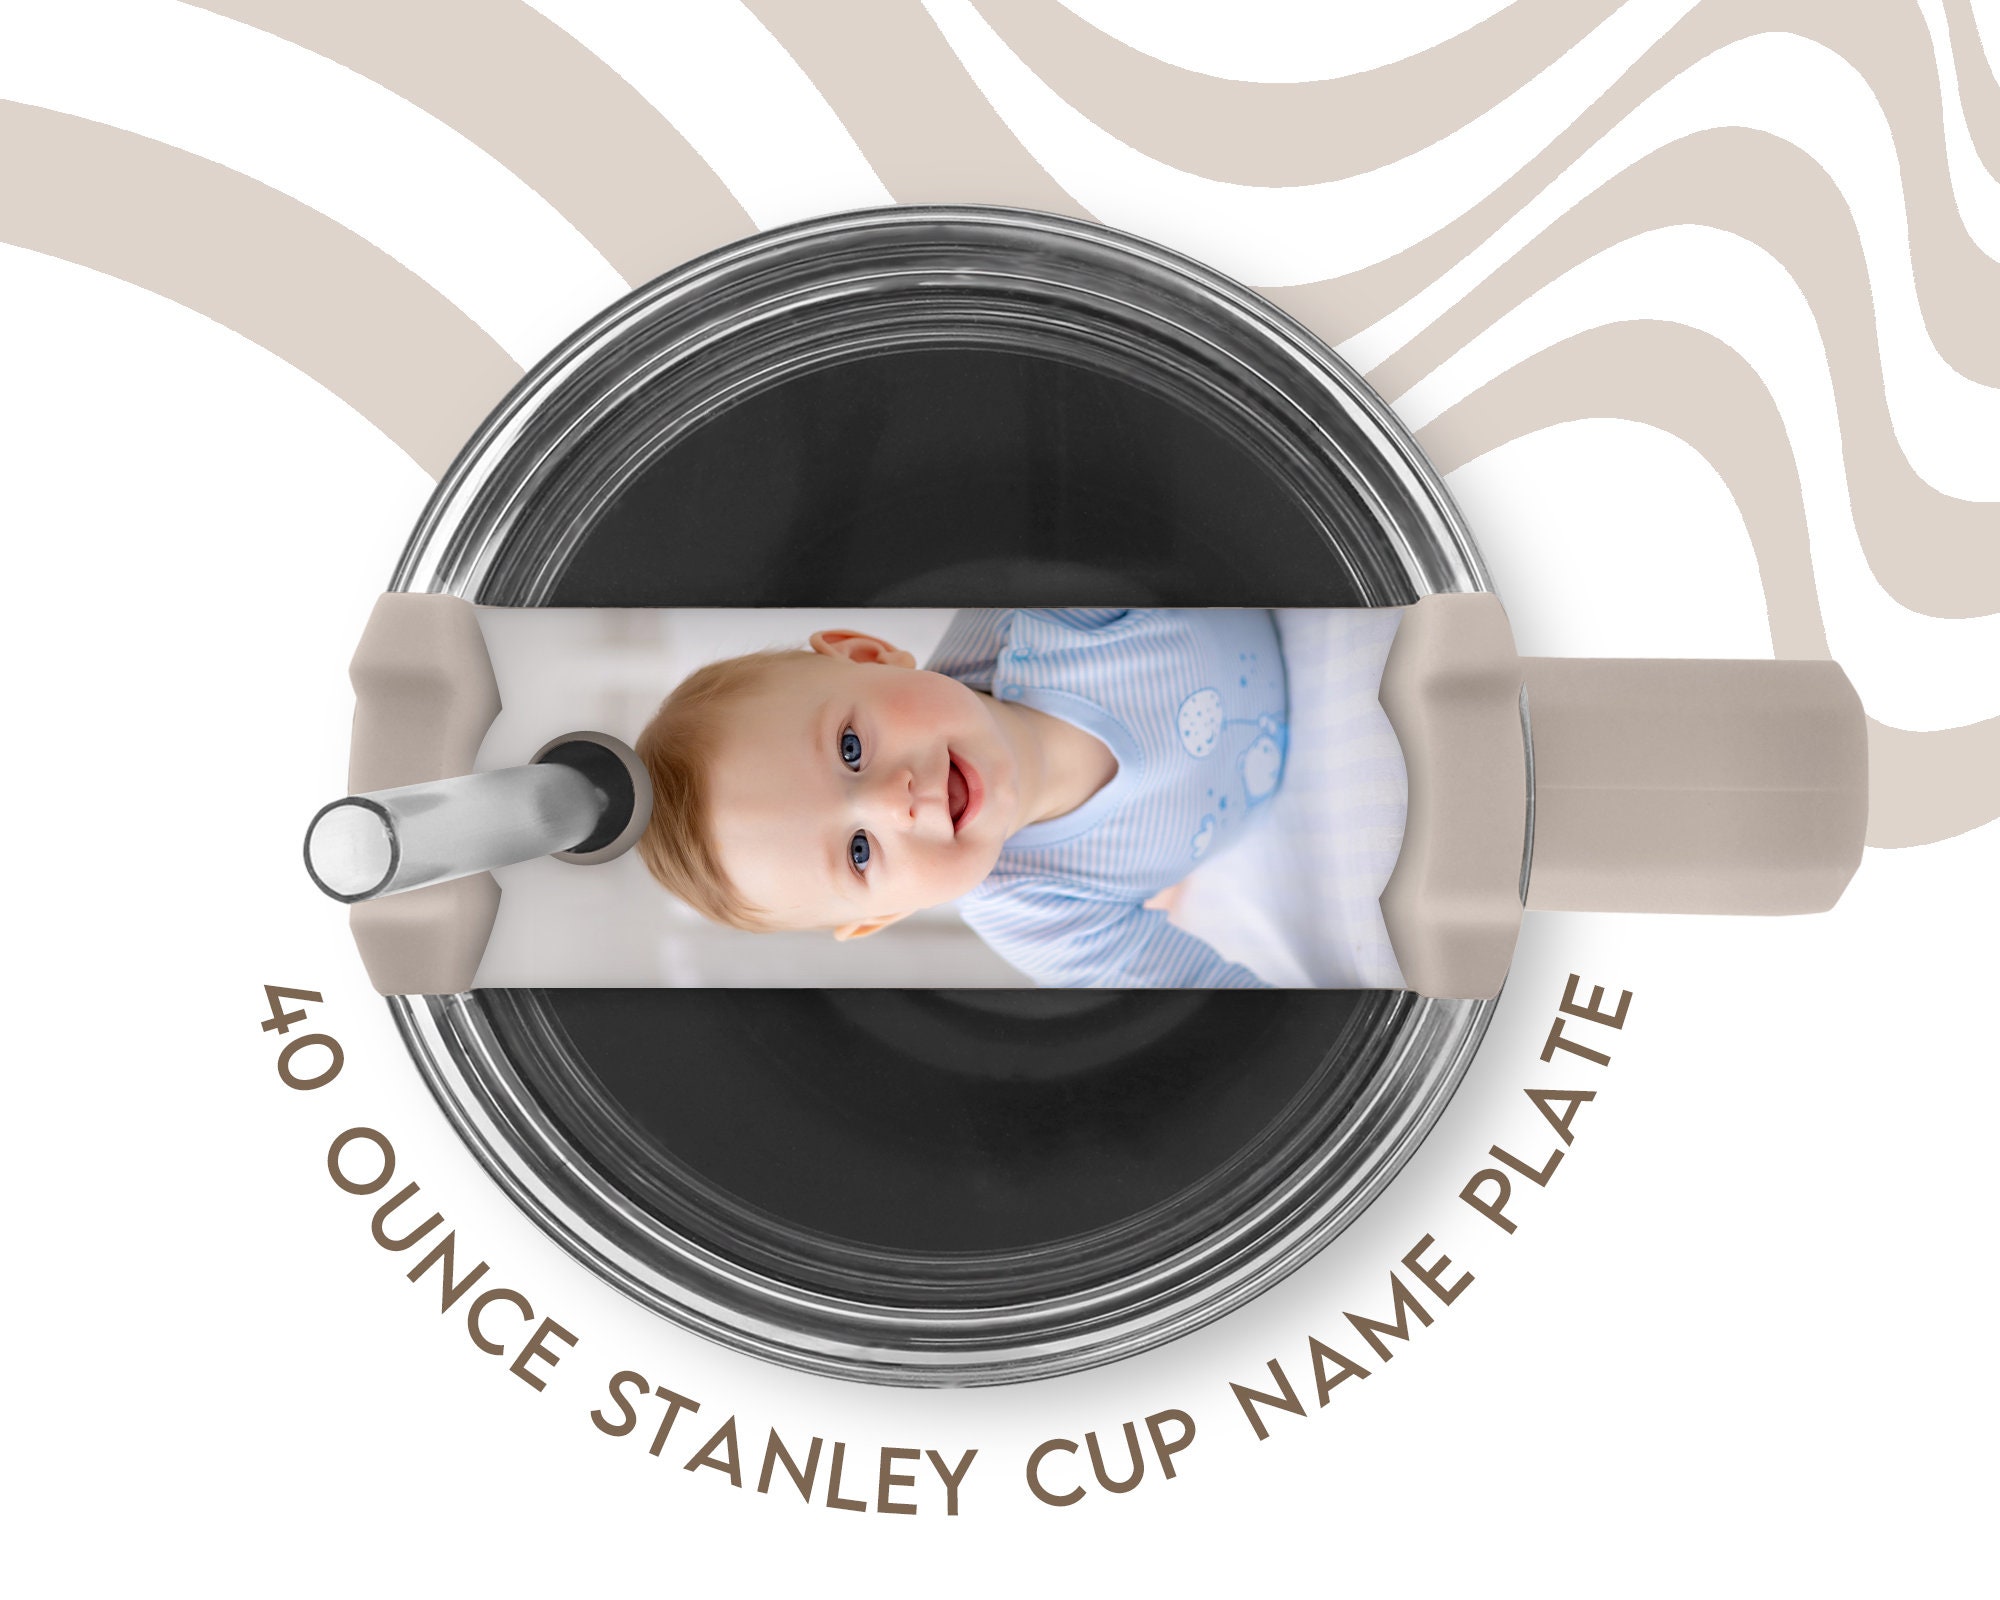 Stanley Cup Name Plate Acrylic Blank- Choose your quantity